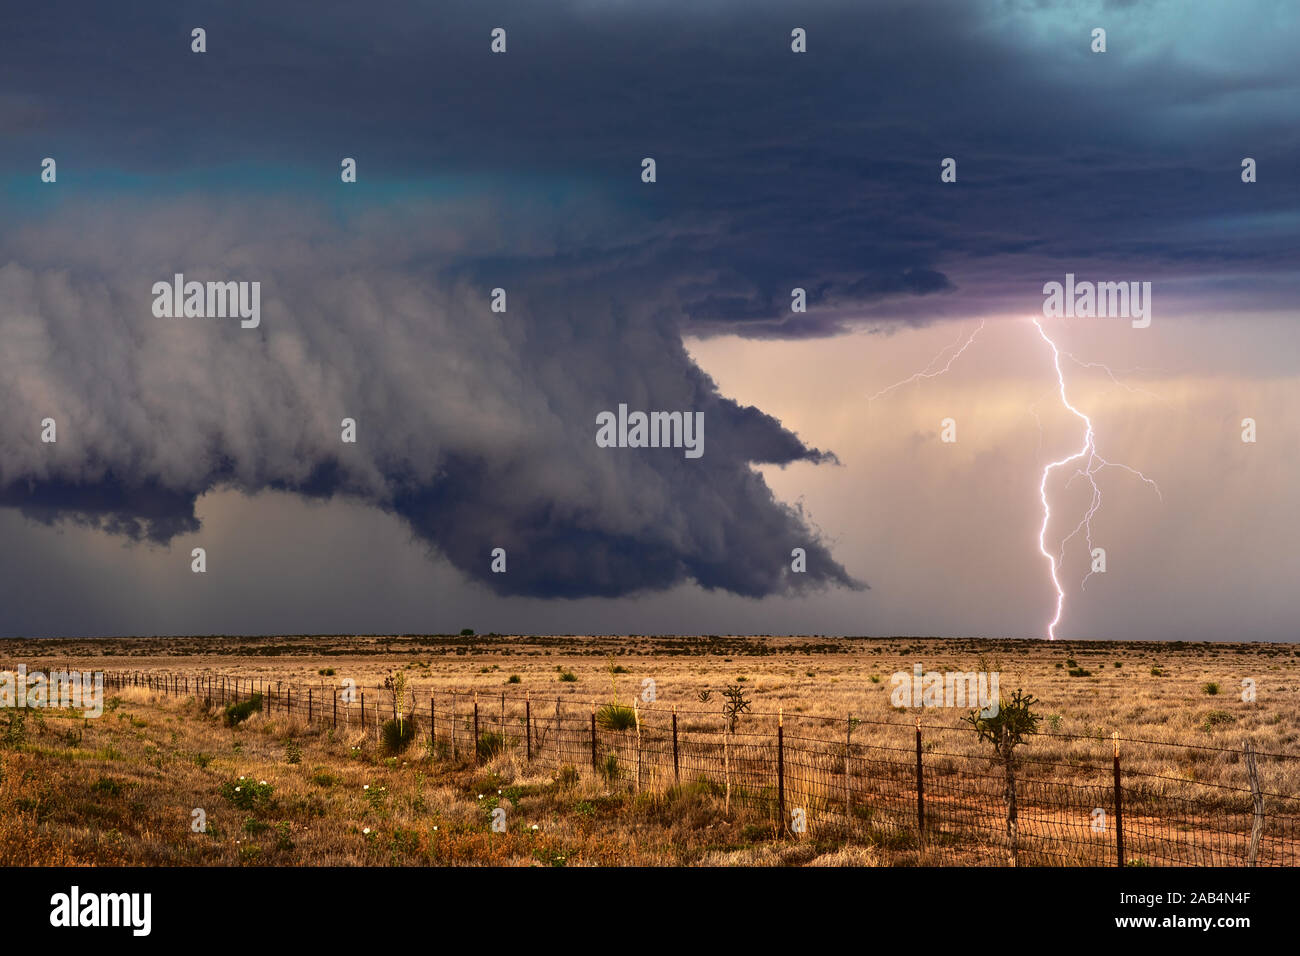 Dramatic lightning strike and ominous storm clouds from an approaching supercell thunderstorm near Roswell, New Mexico Stock Photo